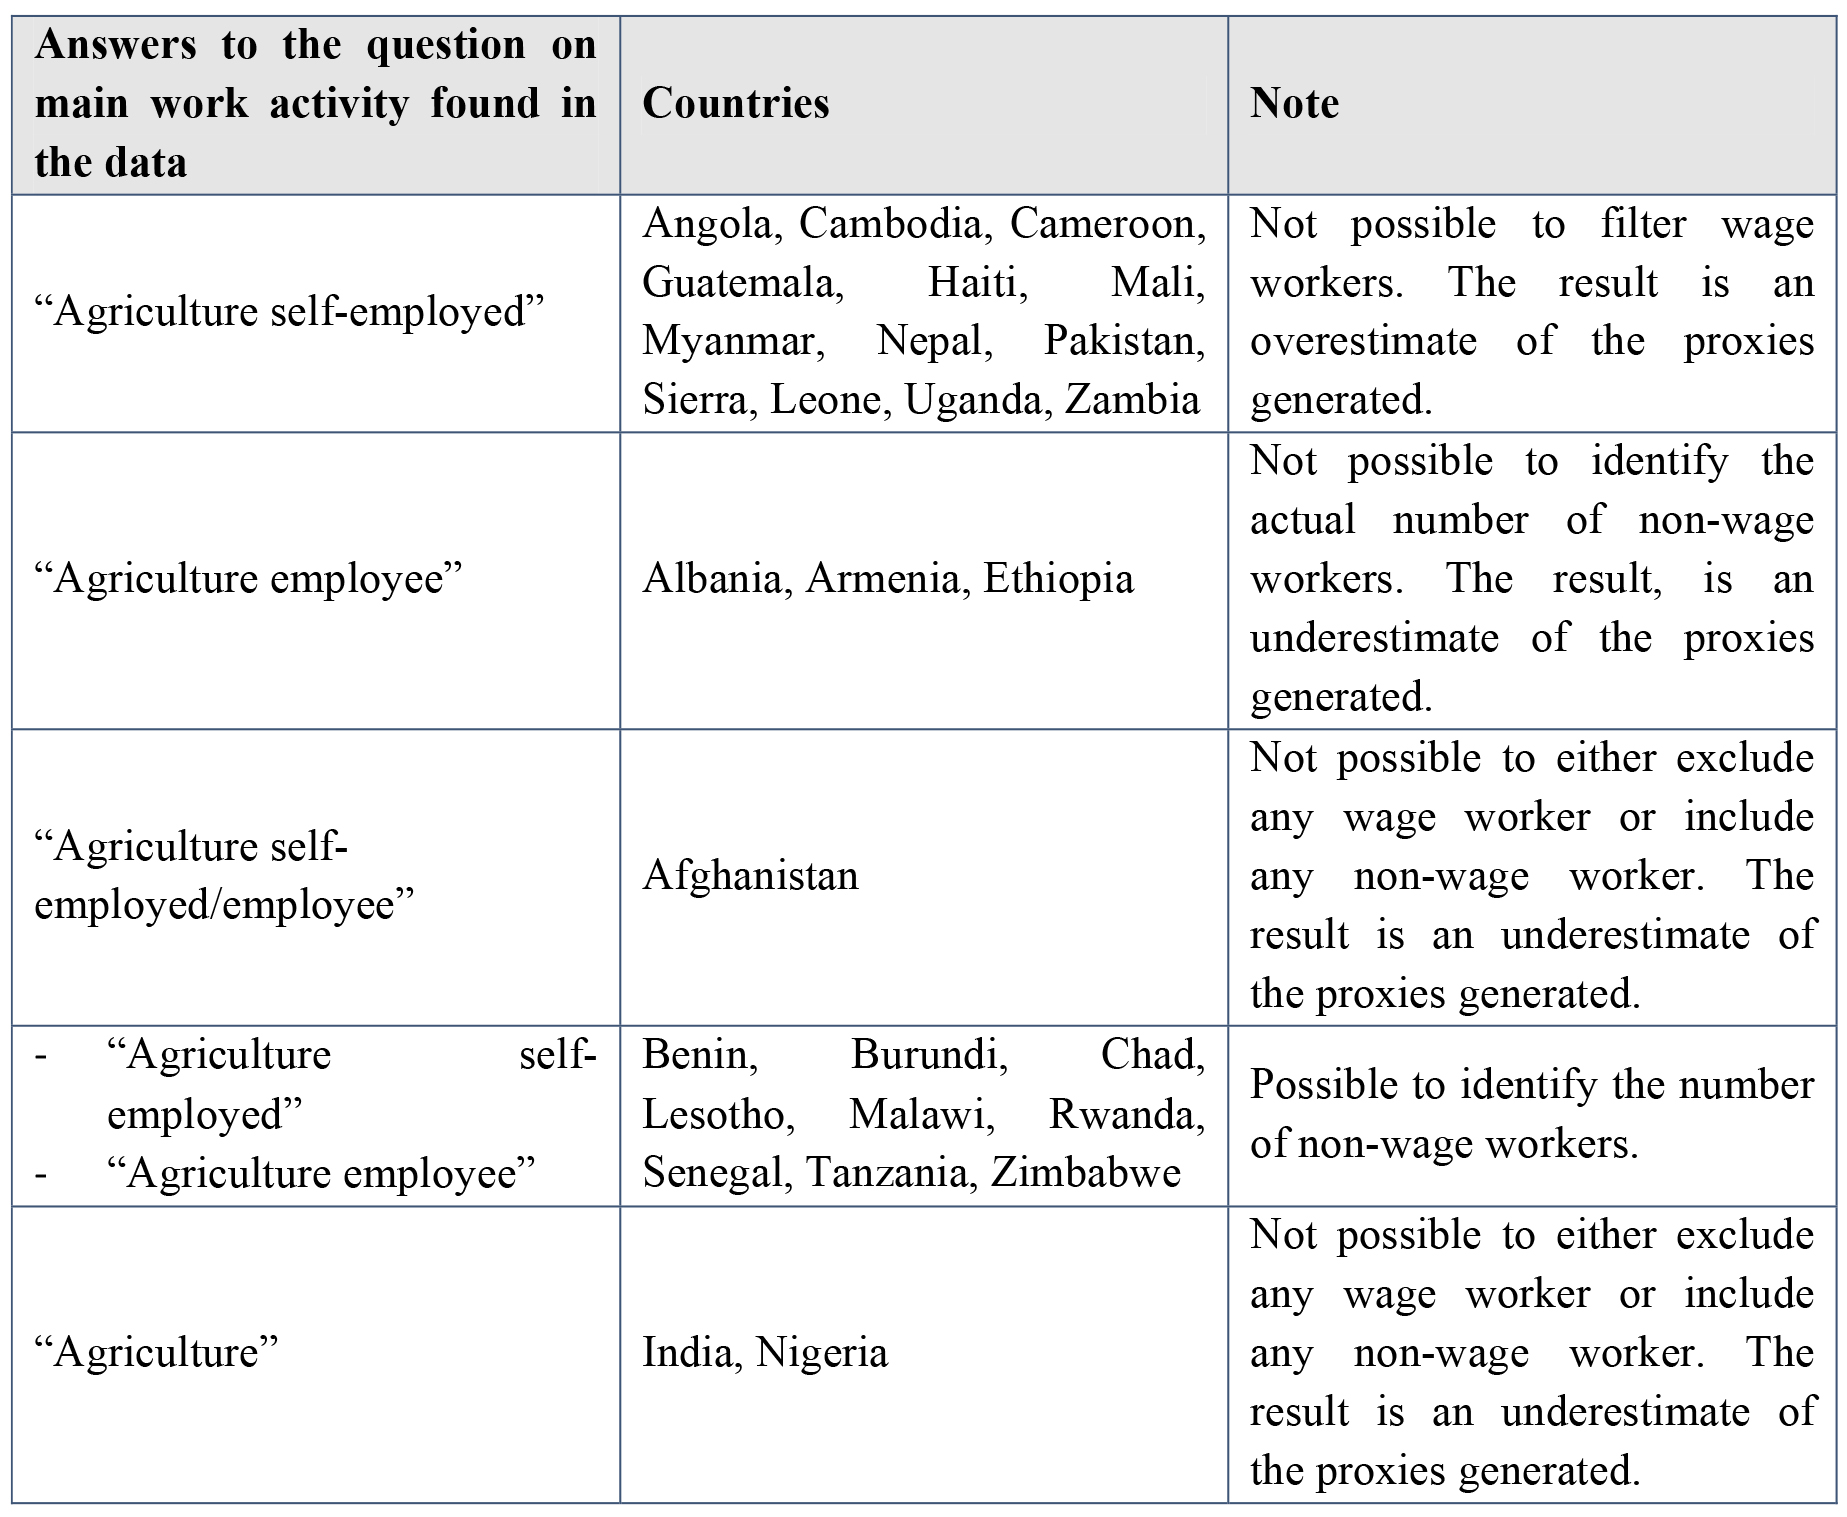 Different types of answers to main work activity found in the data and corresponding limitations.